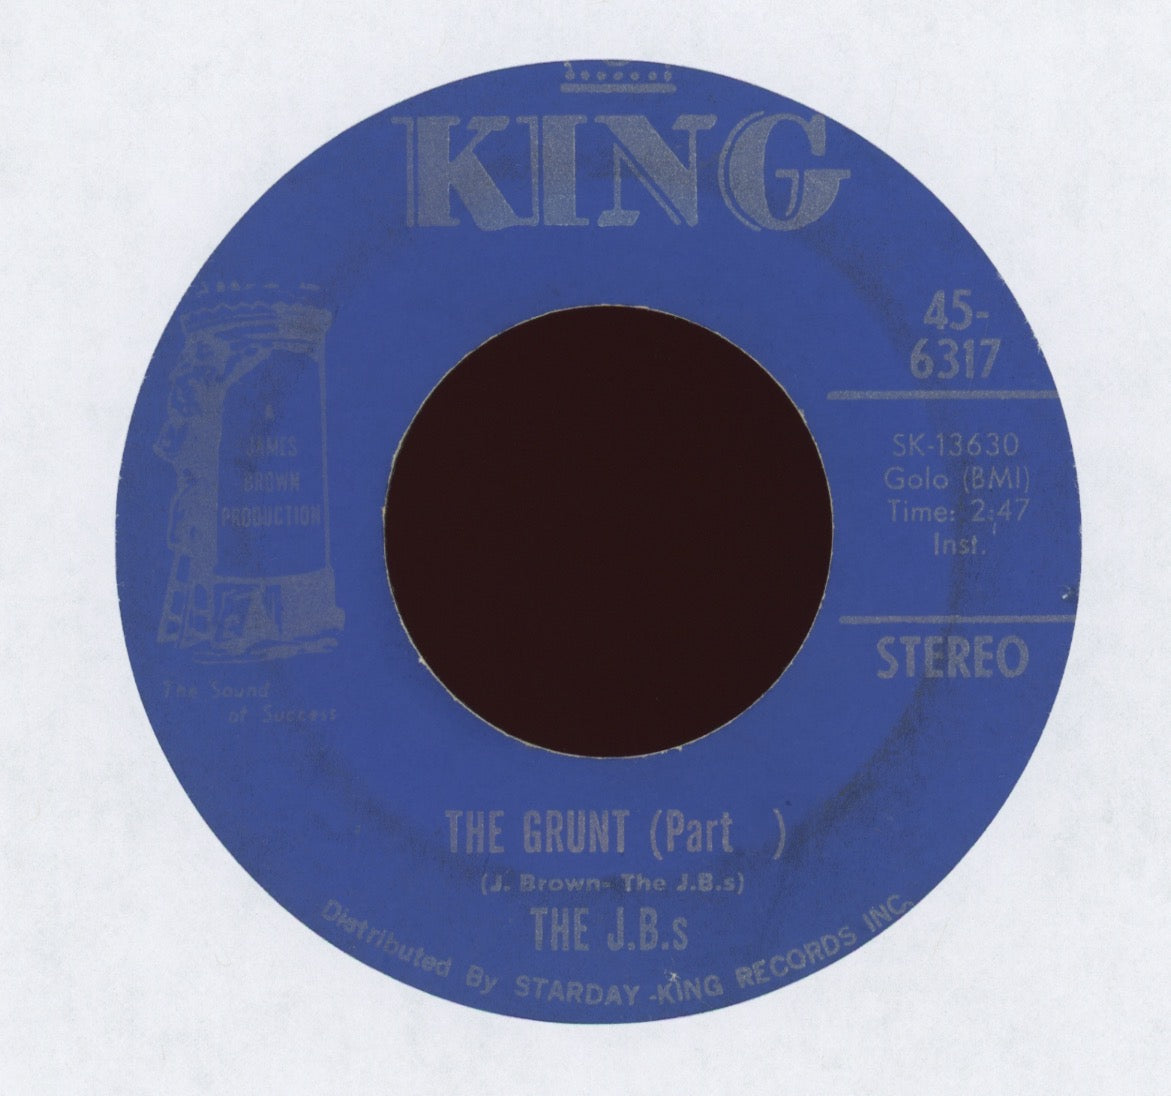 The J.B.'s - The Grunt on King Funk 45